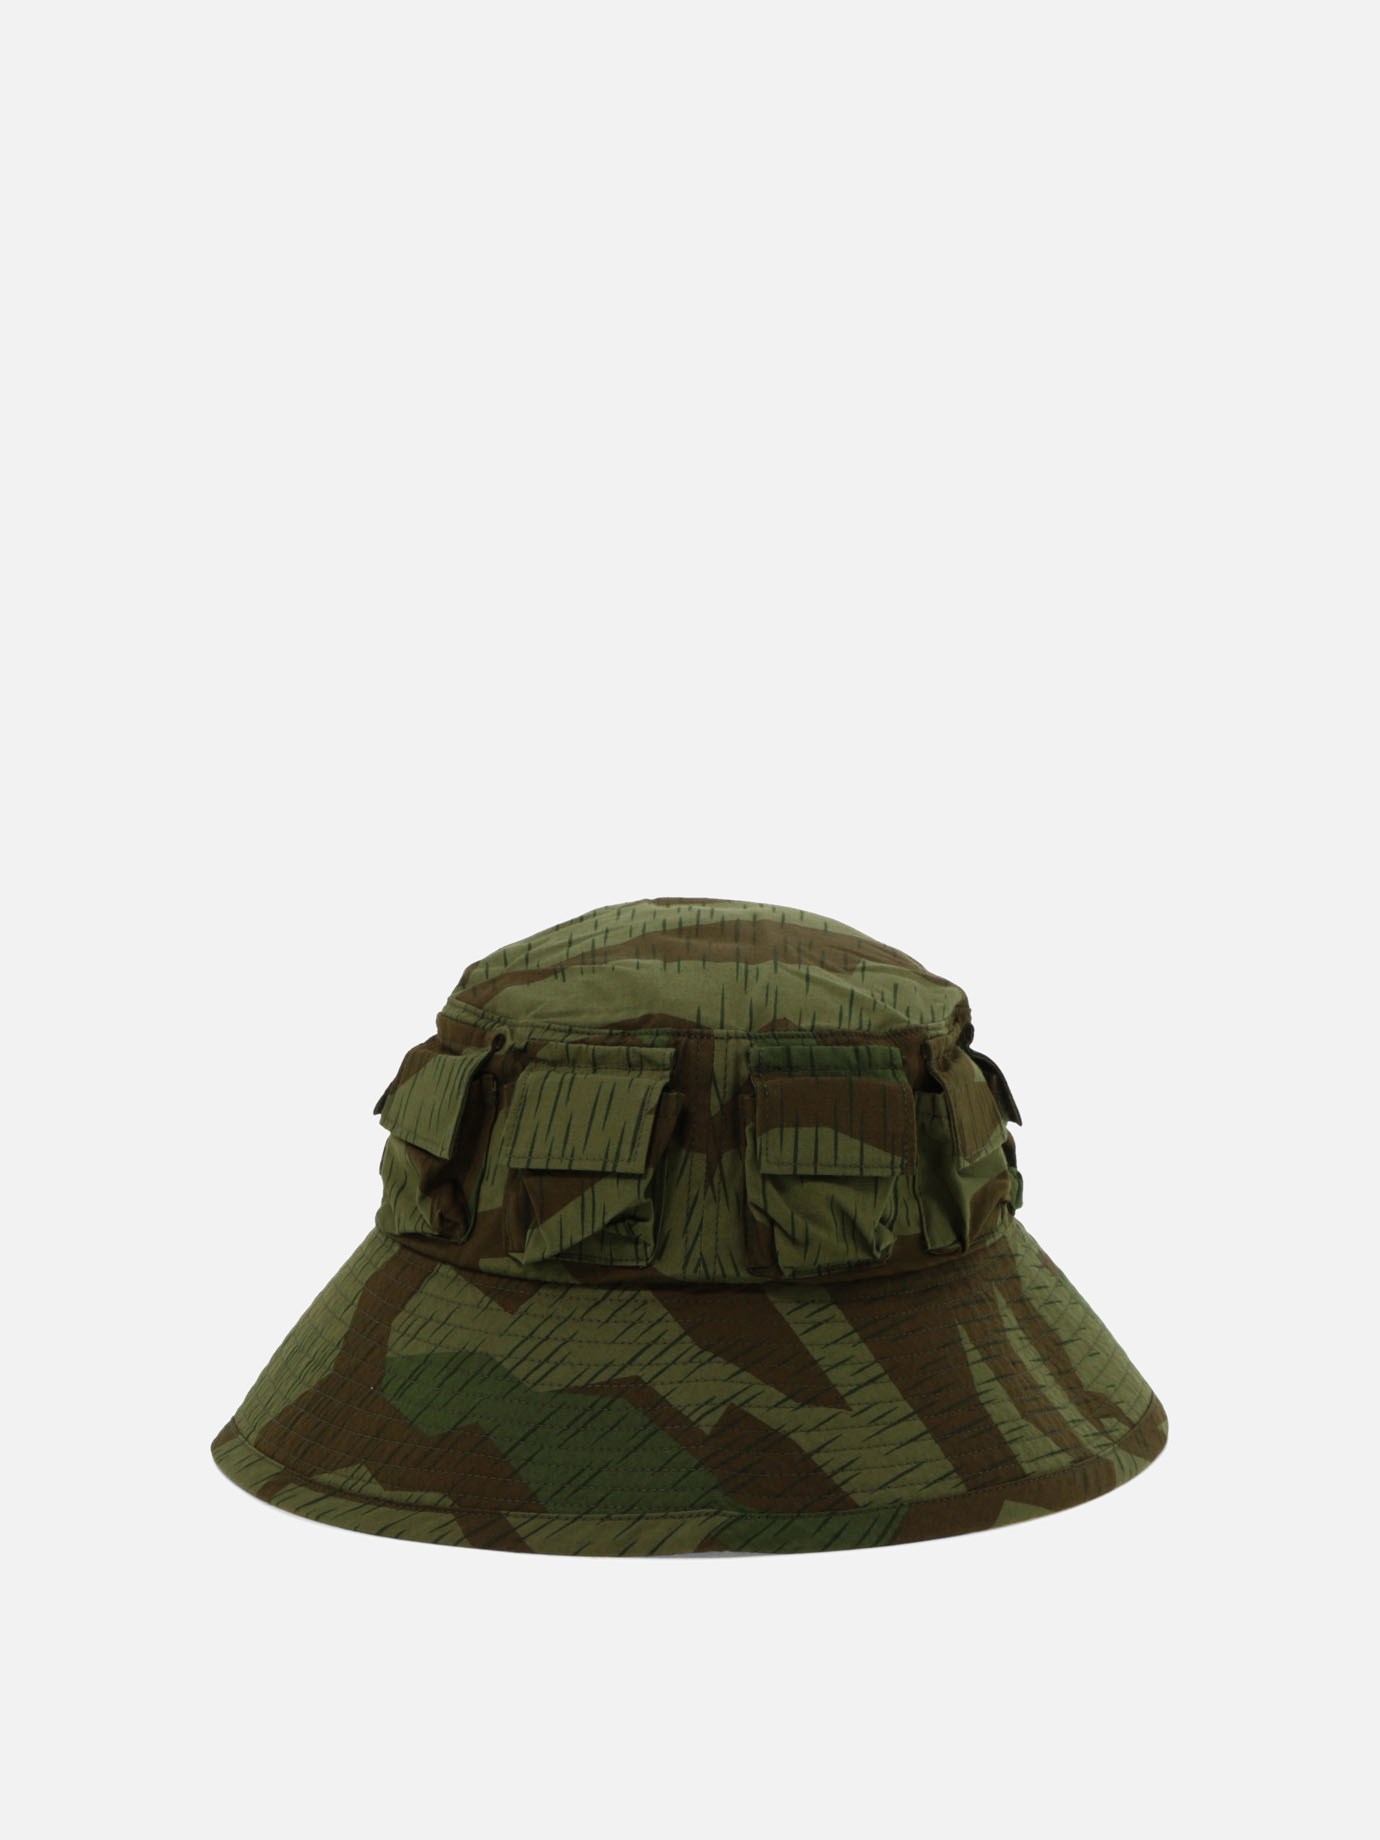  Boonie  bucket hatby Mountain Research - 1